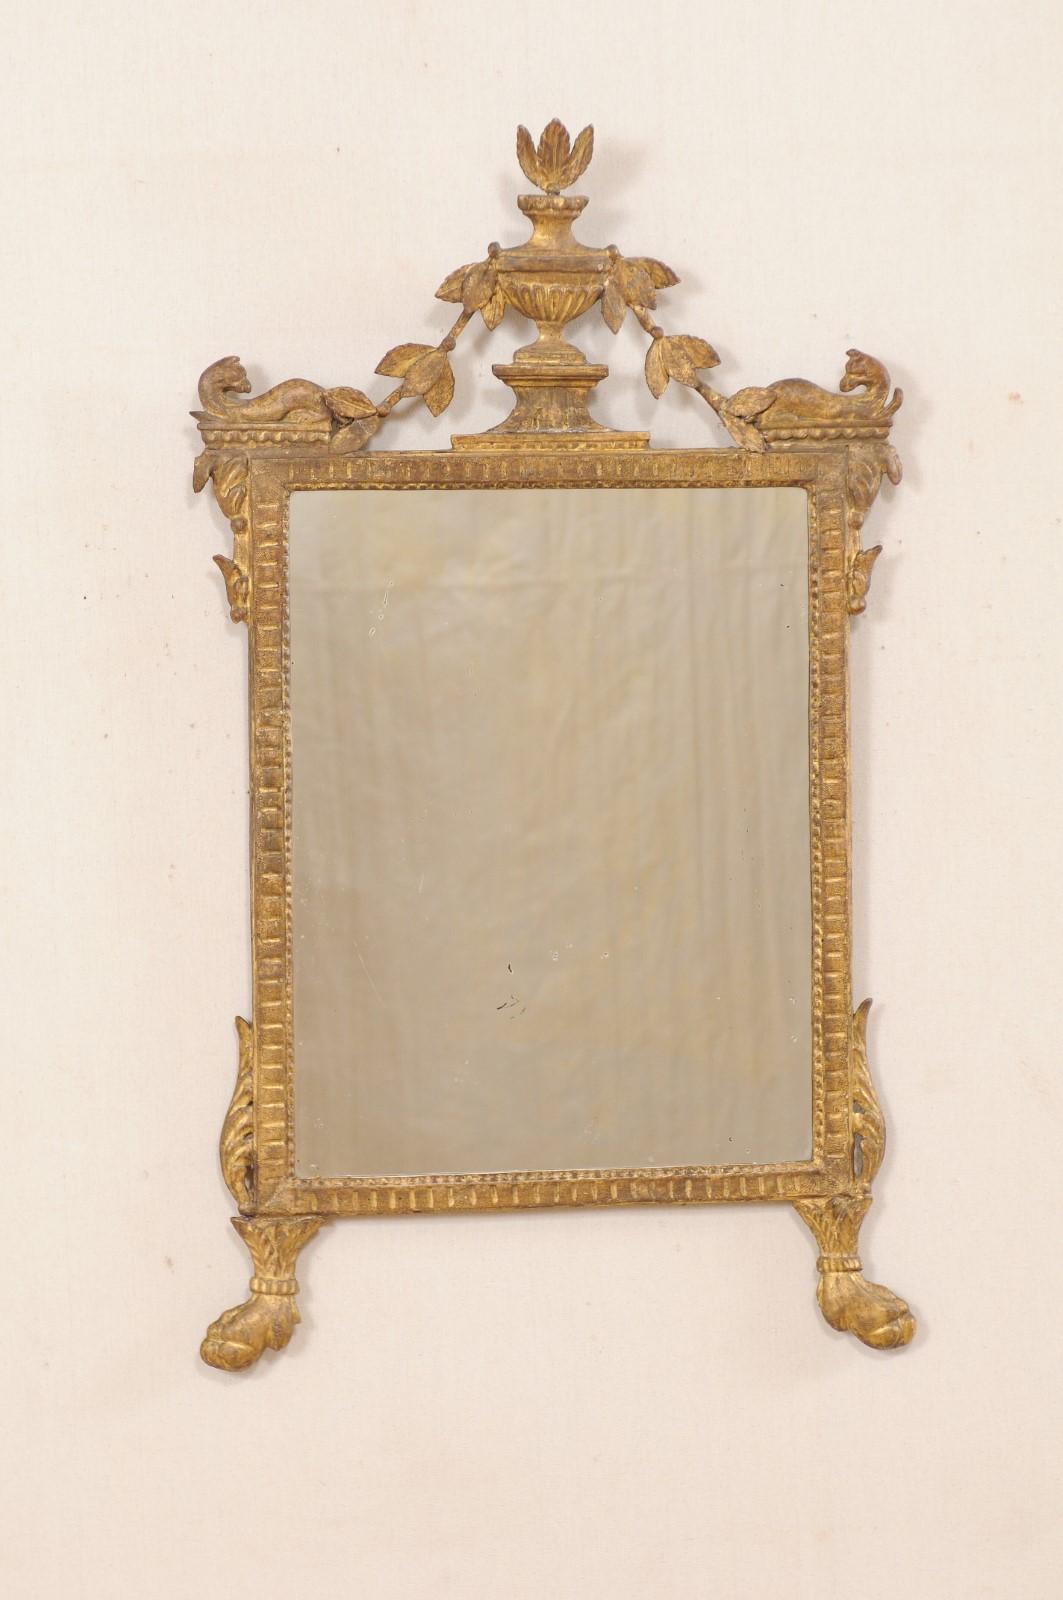 An Italian neoclassical carved and giltwood mirror from the 18th century. This antique mirror from Italy features a richly carved giltwood surround, in typical neoclassical style, adorn with a raised urn crest at top center of frame, with various